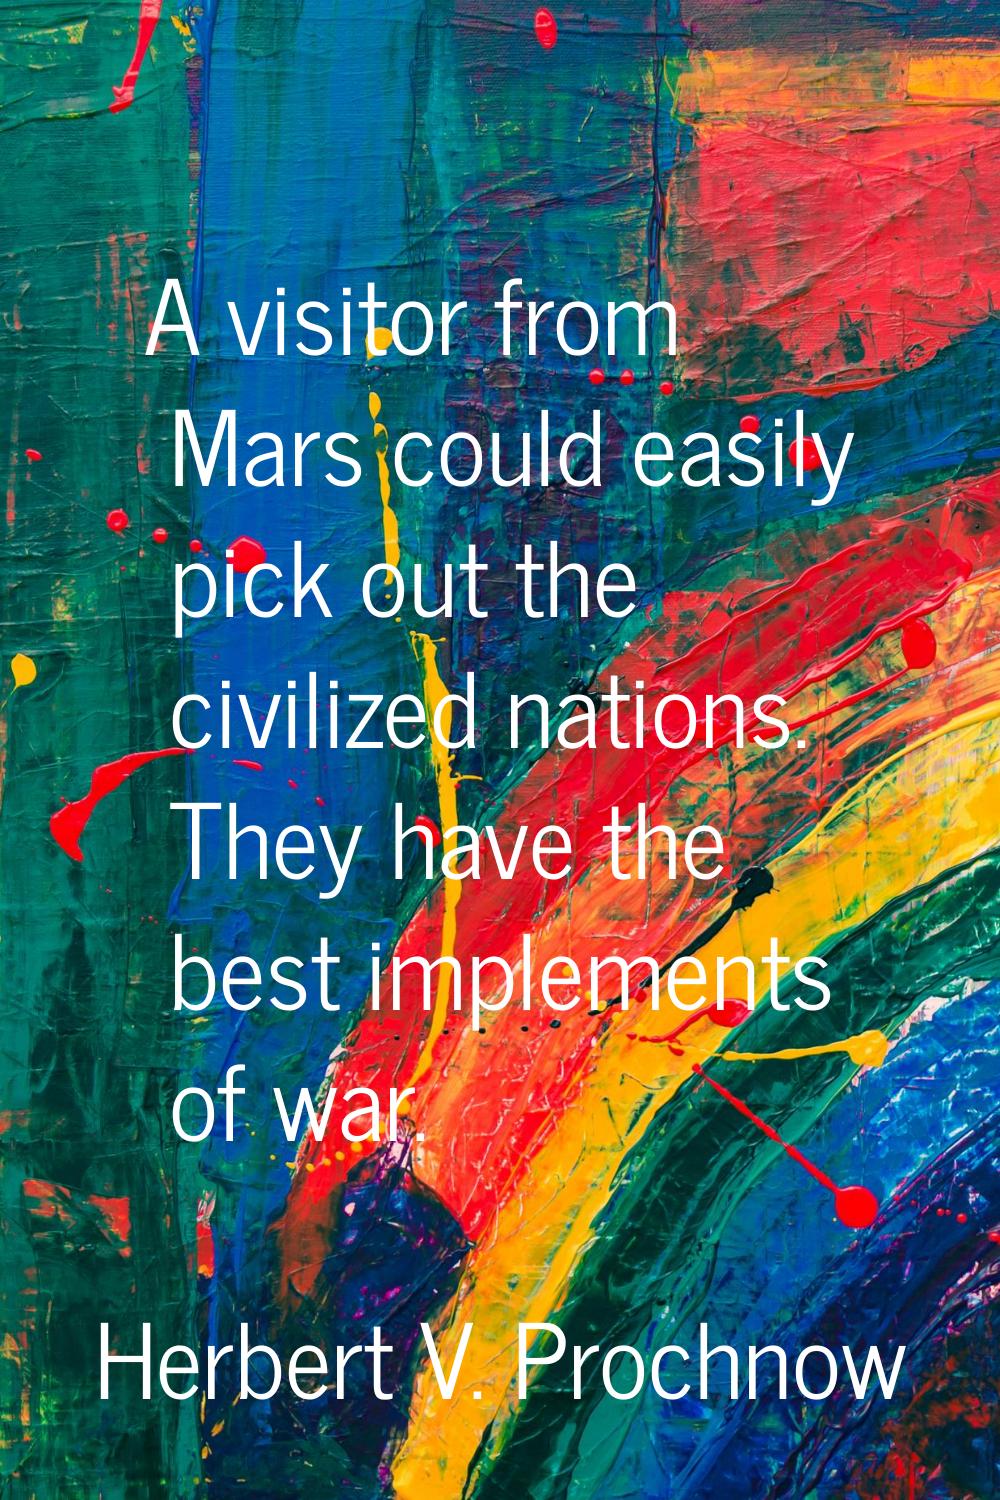 A visitor from Mars could easily pick out the civilized nations. They have the best implements of w